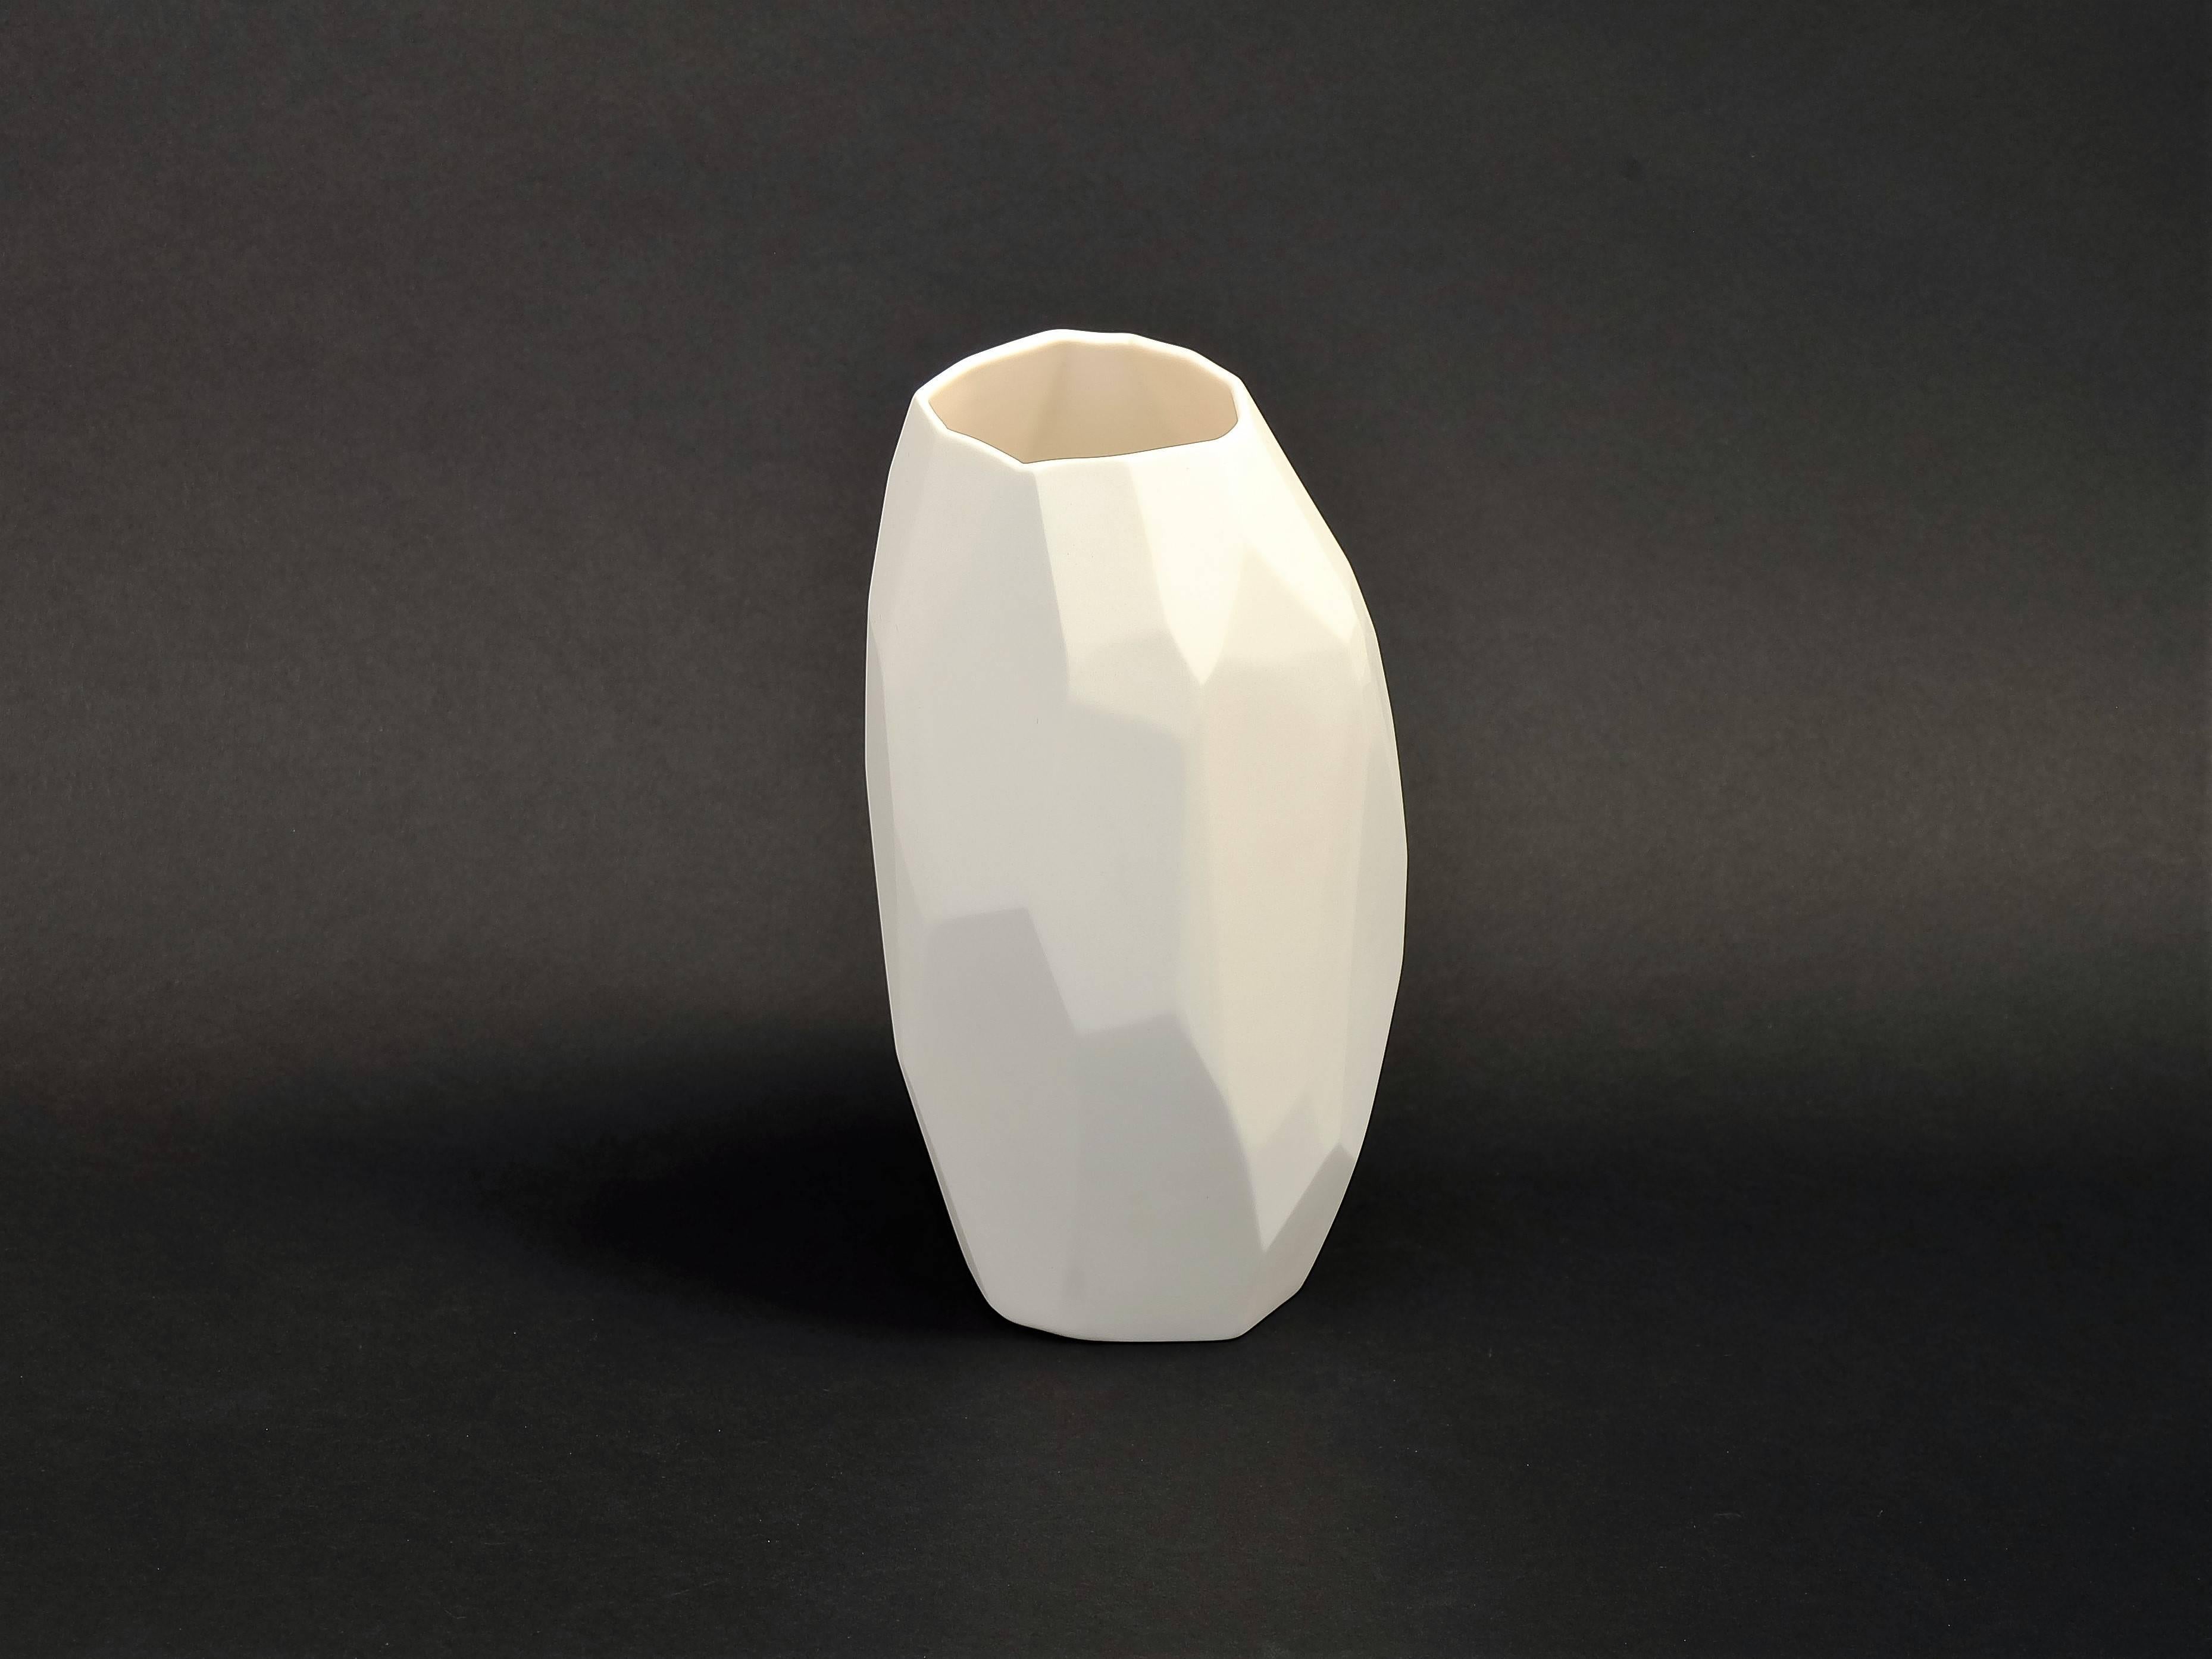 Vase from the Fragments series - Naturalistic Art by Vezzini & Chen